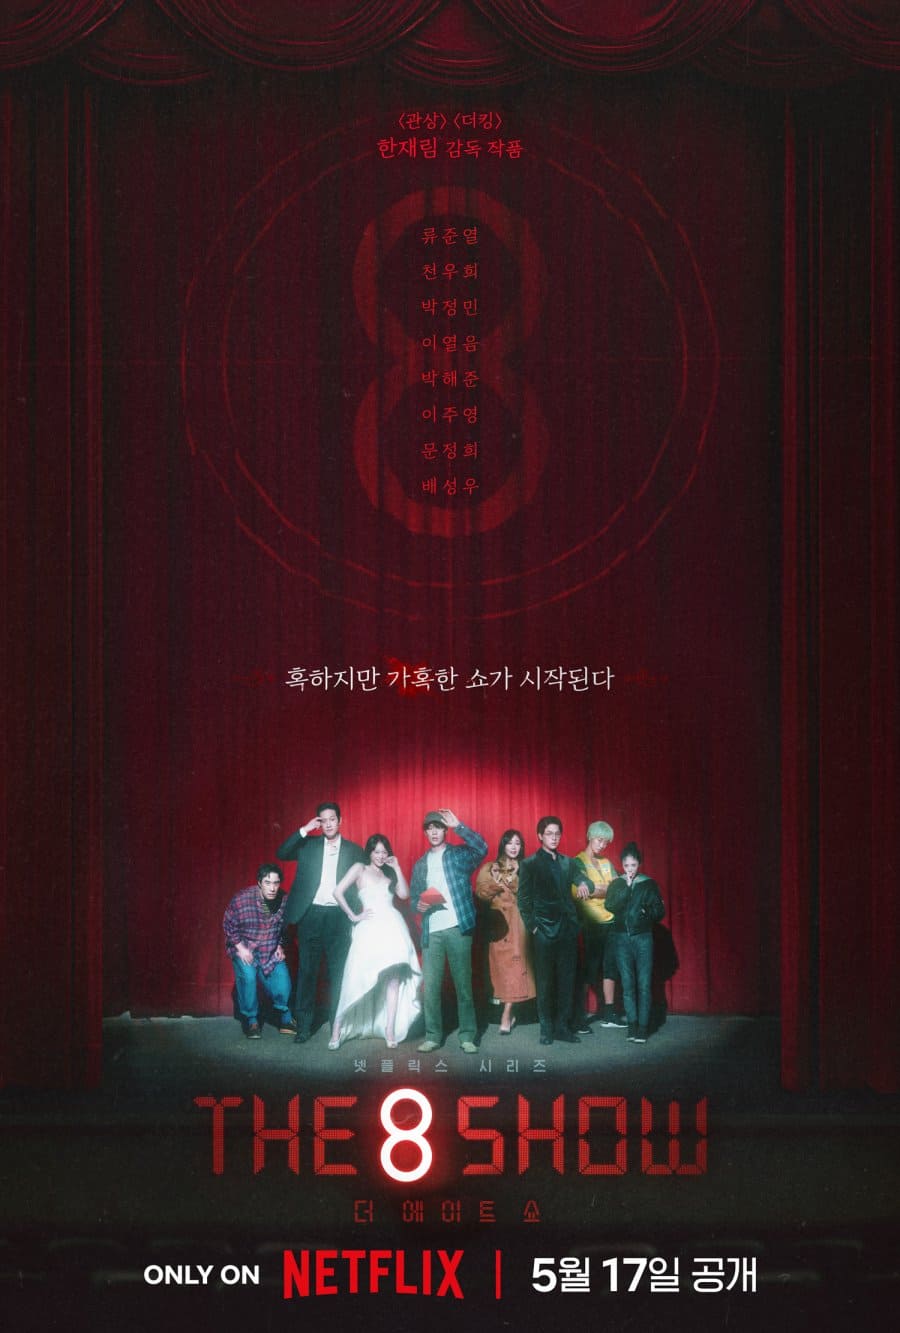 The 8 Show - Sinopsis, Pemain, OST, Episode, Review